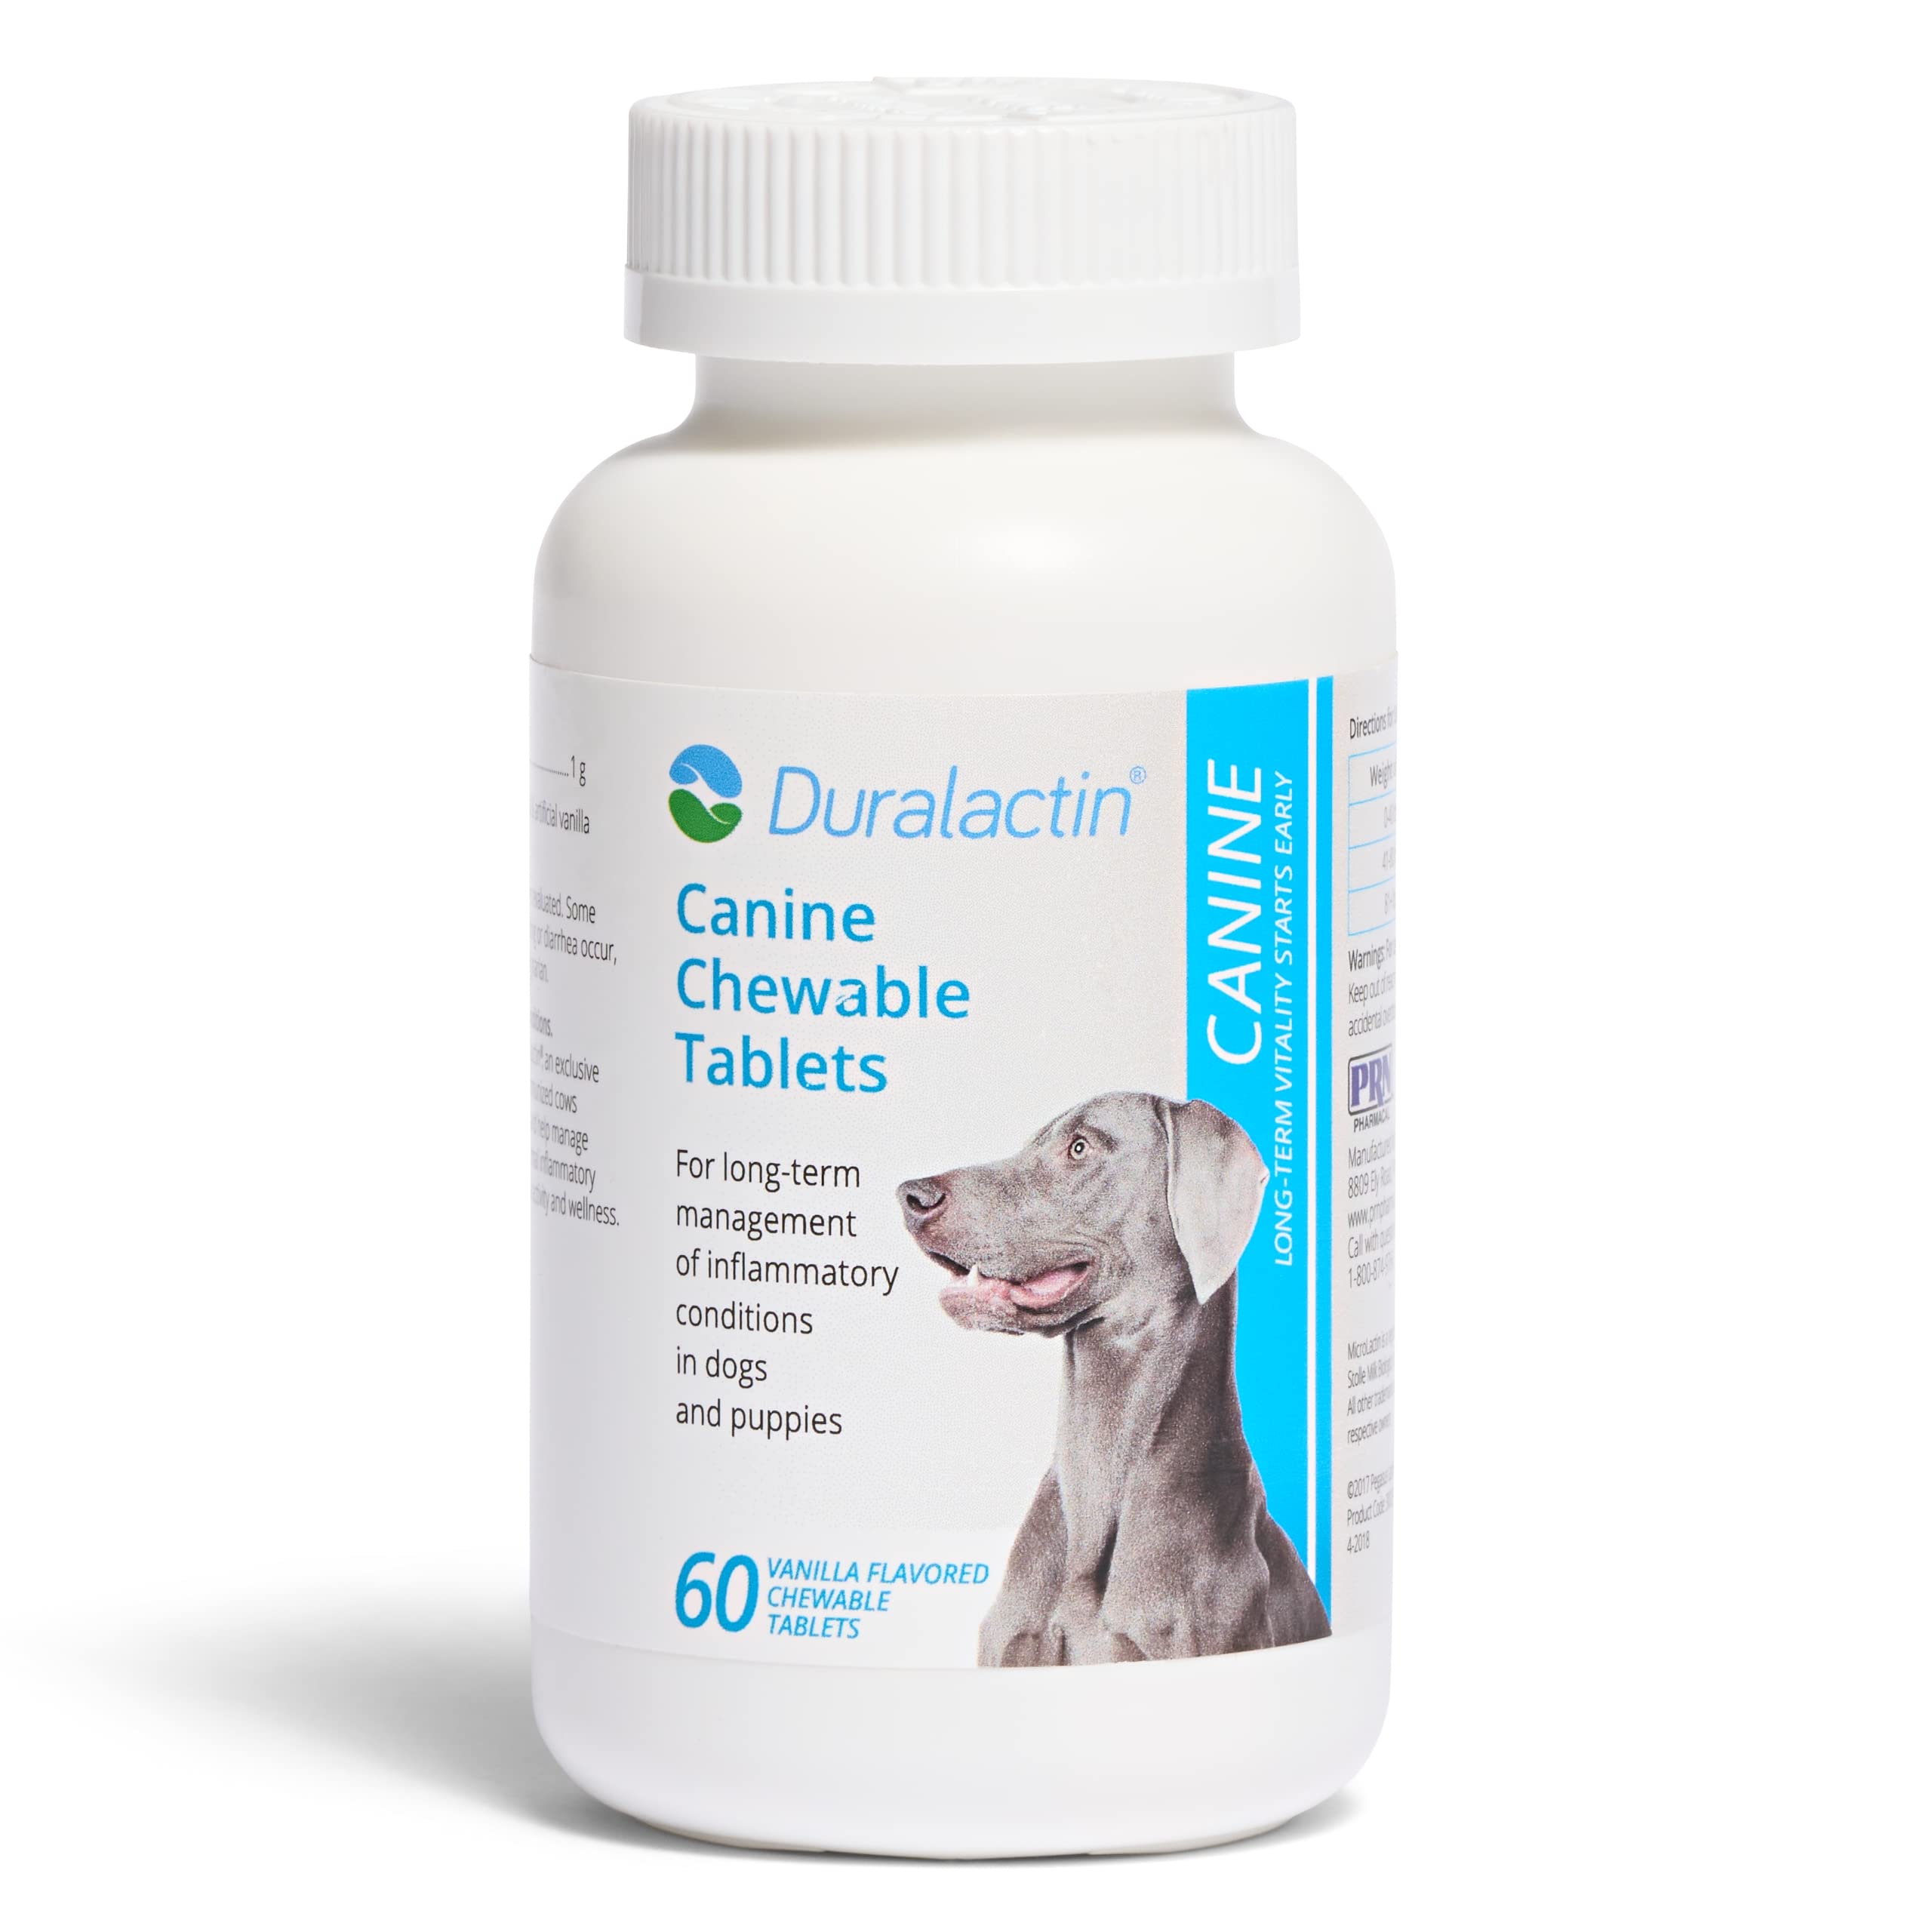 Veterinary Products Laboratories PRN Pharmacal Duralactin canine chewable Tablets - Joint Health Supplement for Dogs & Puppies Supports Mobility & Wellness - Tab